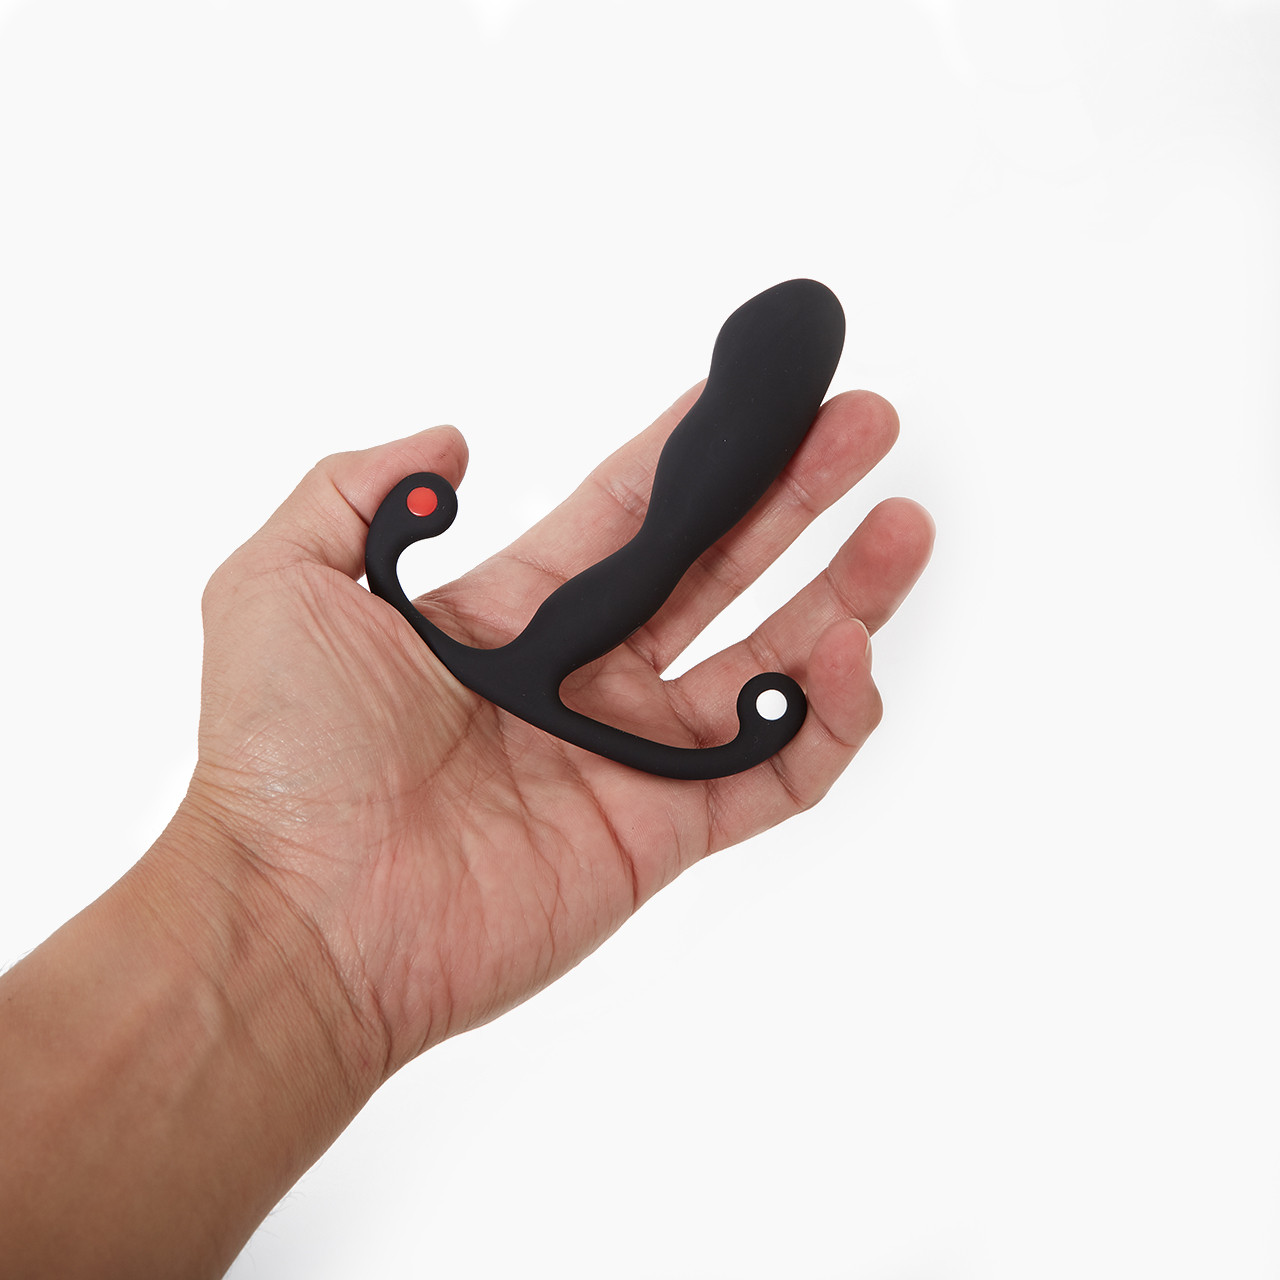 Aneros Helix Syn Trident', a black silicone prostate massager held in a hand